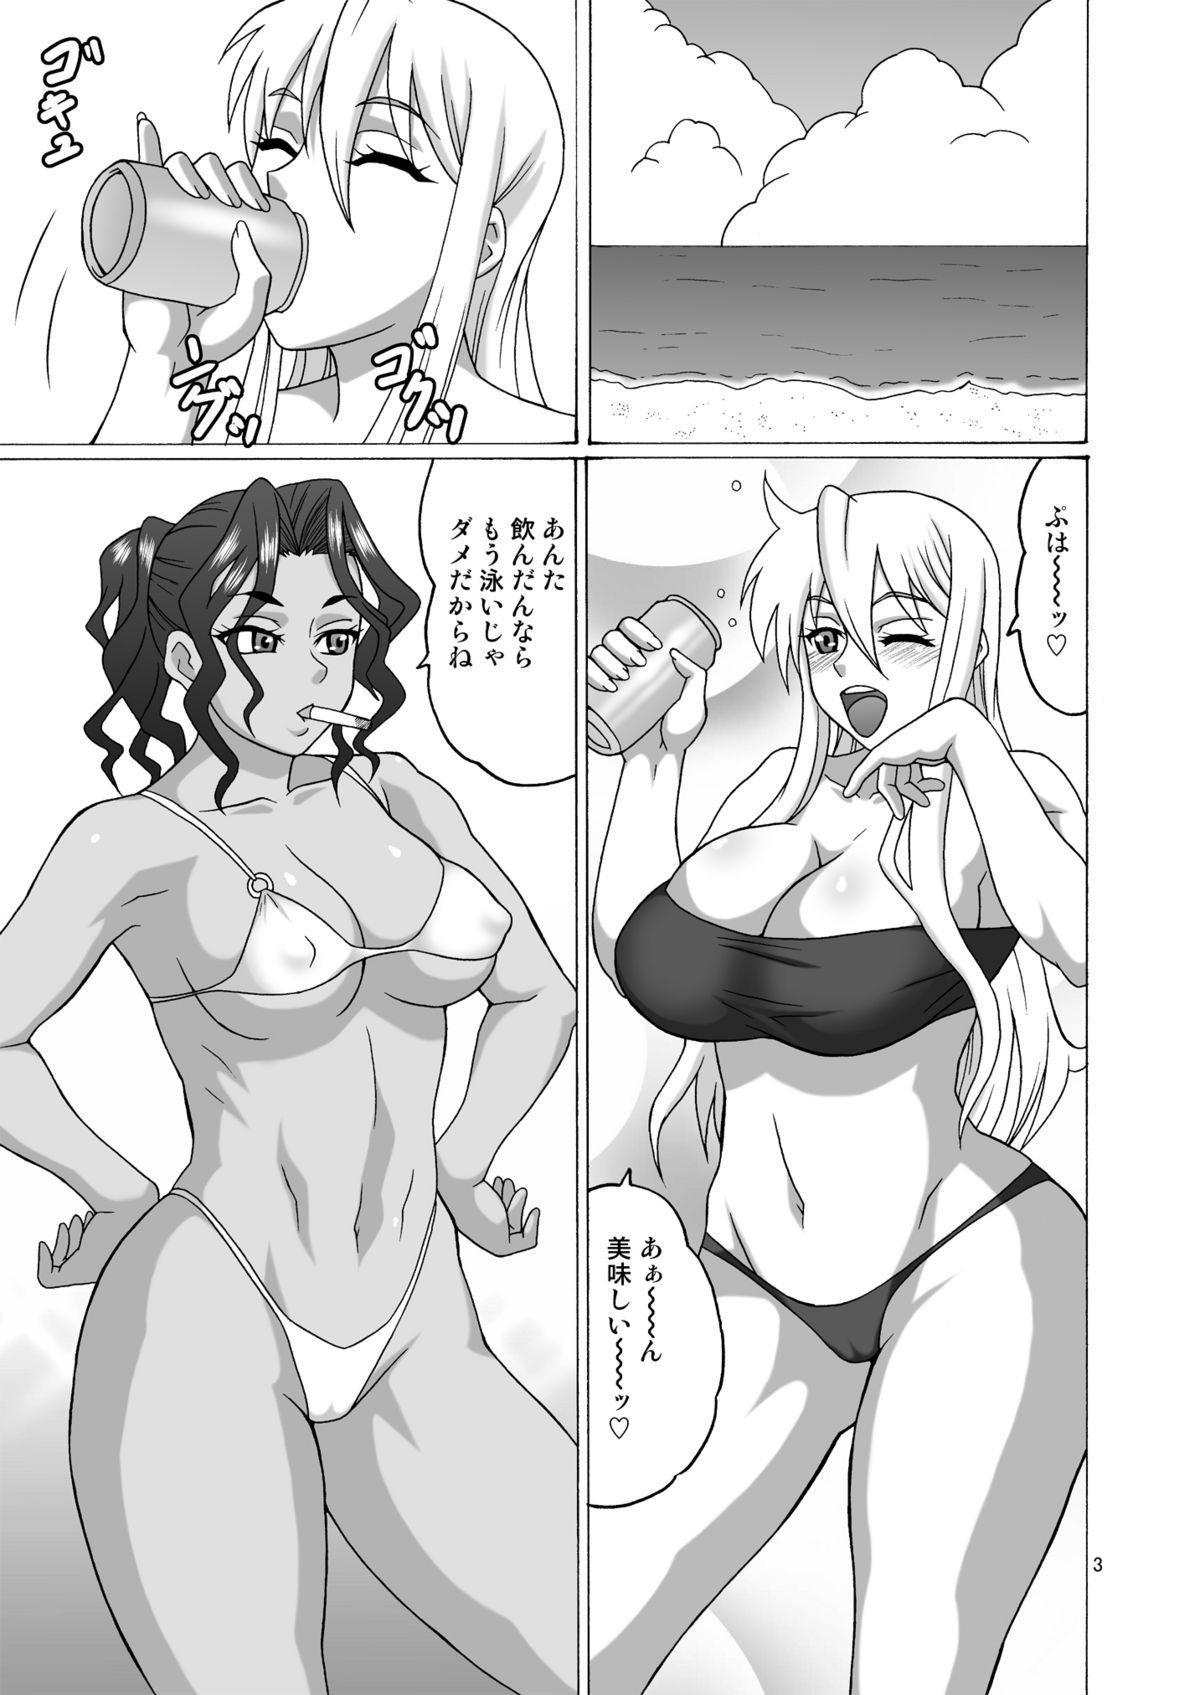 Butt Fuck Beach no BITCH - Highschool of the dead Reality - Page 2